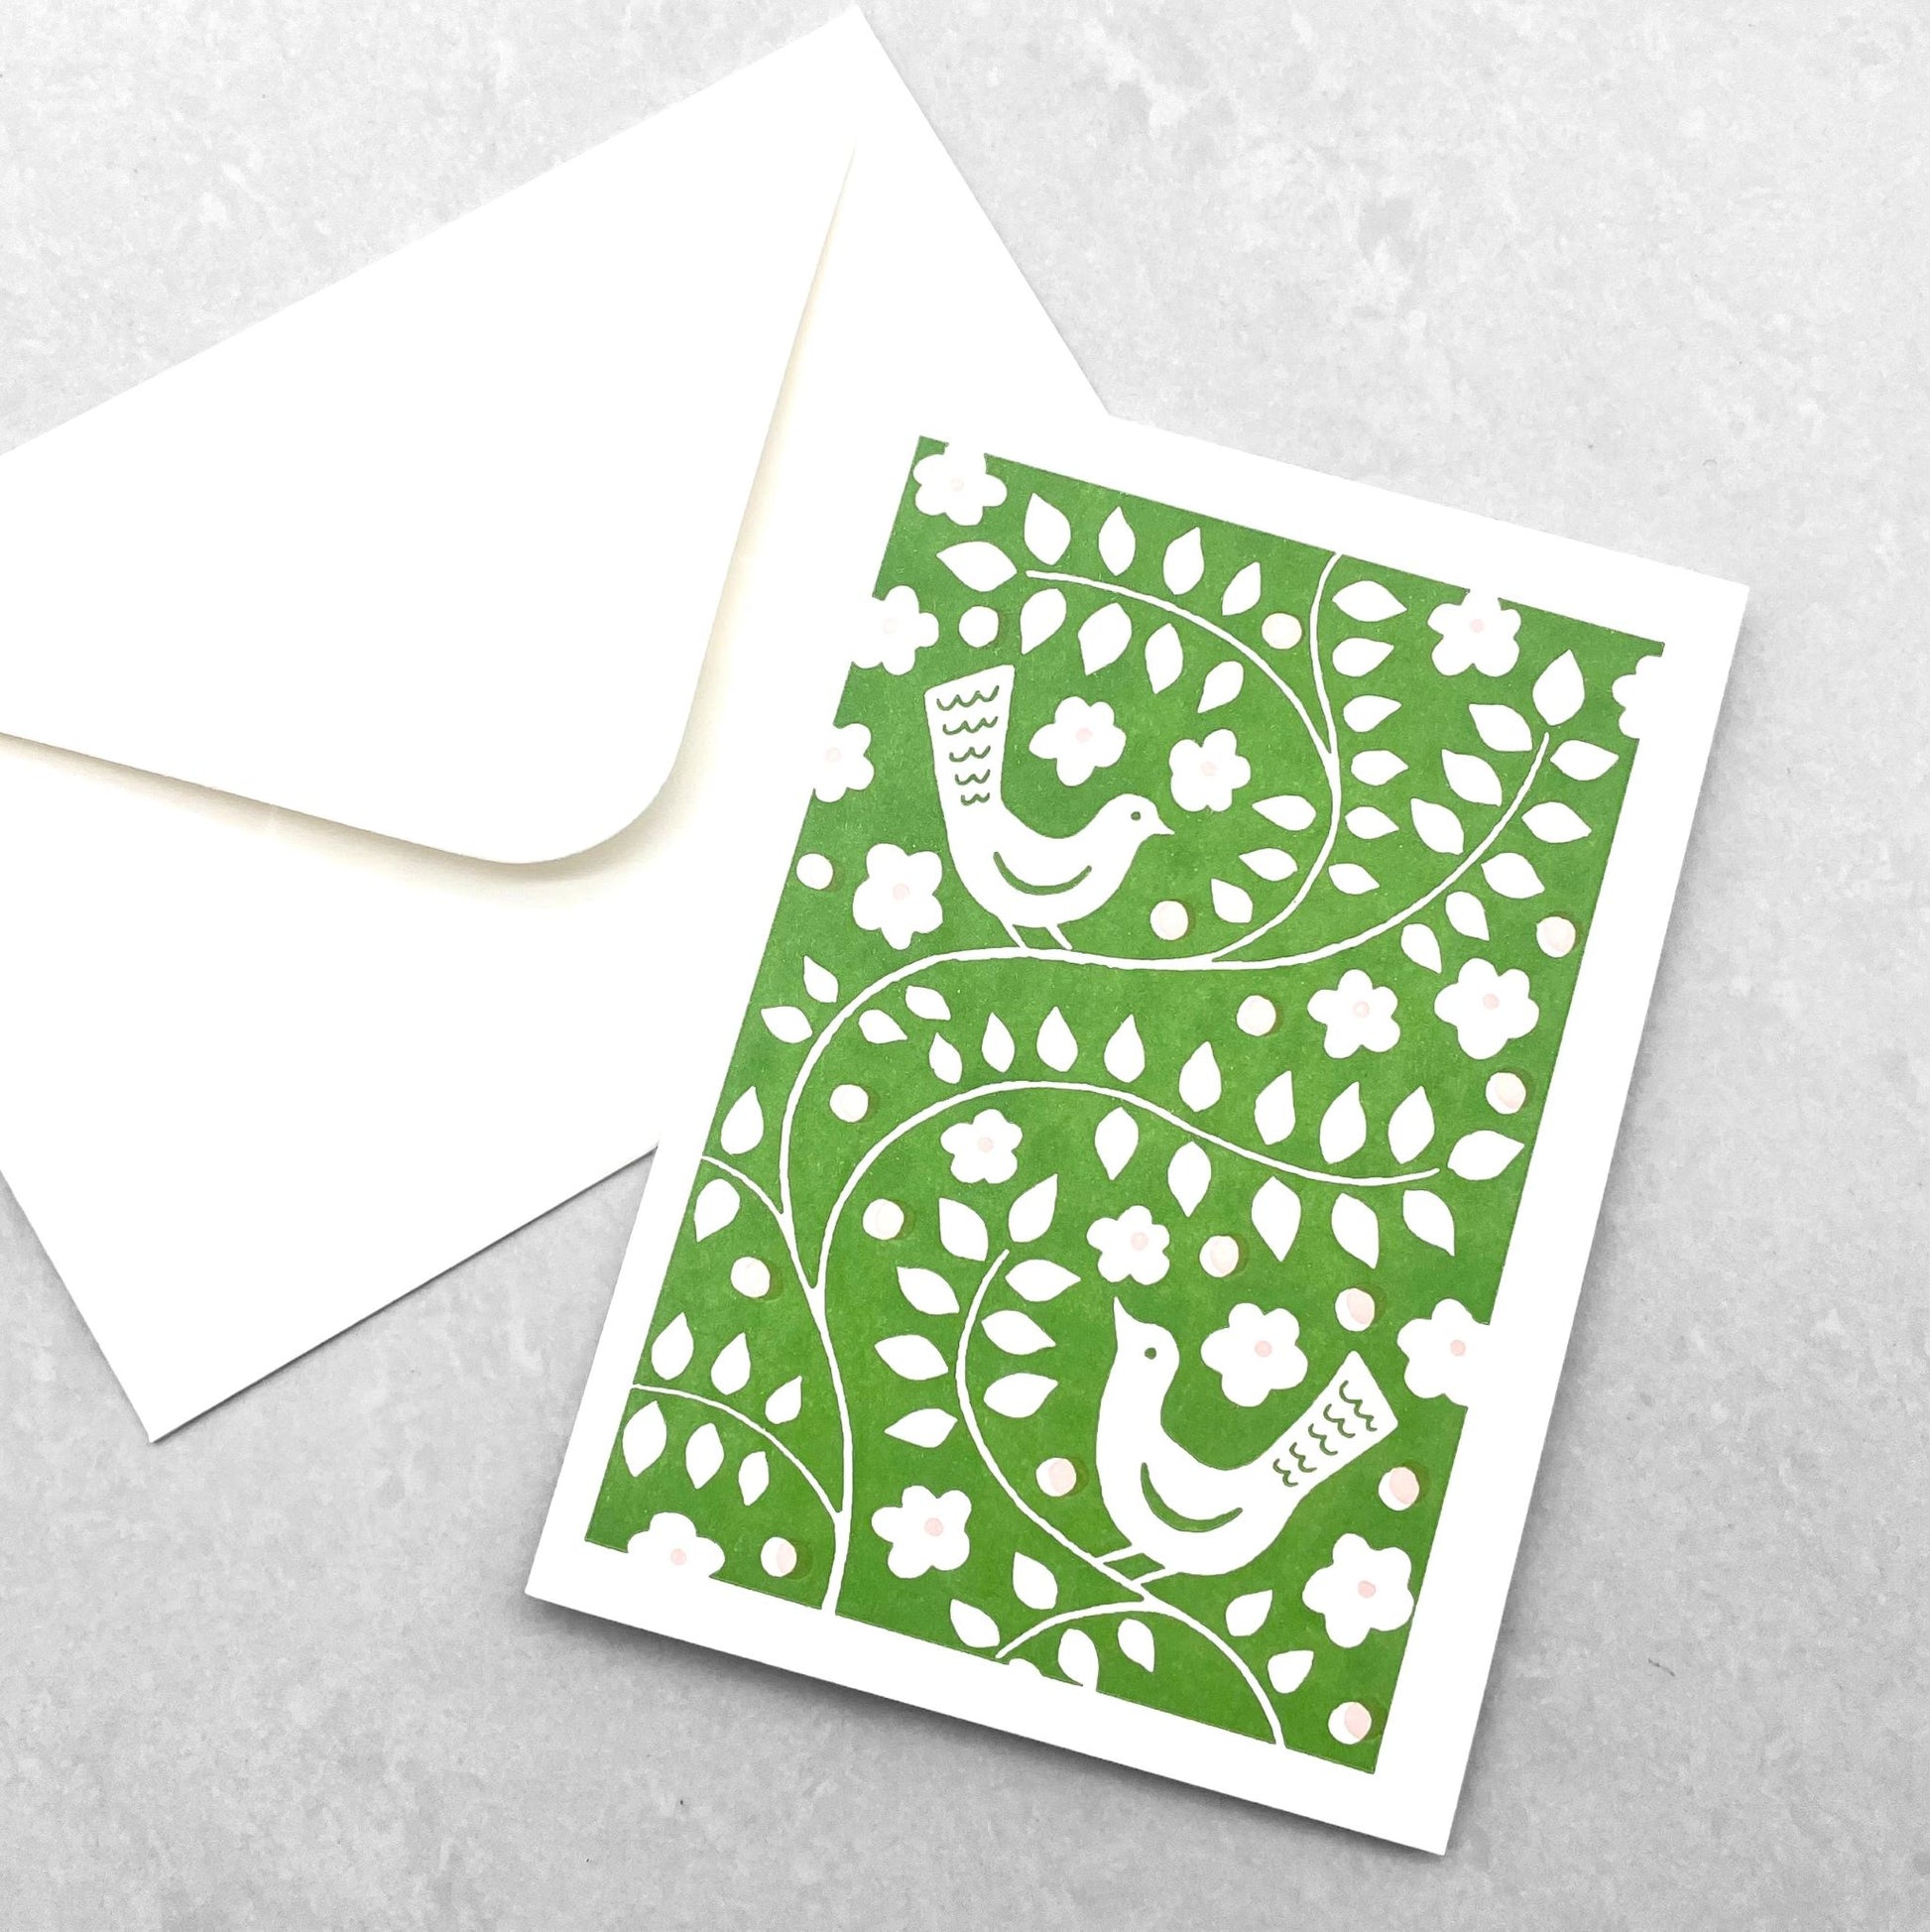 small greetings card with green bird and flowers design by Archivist Gallery